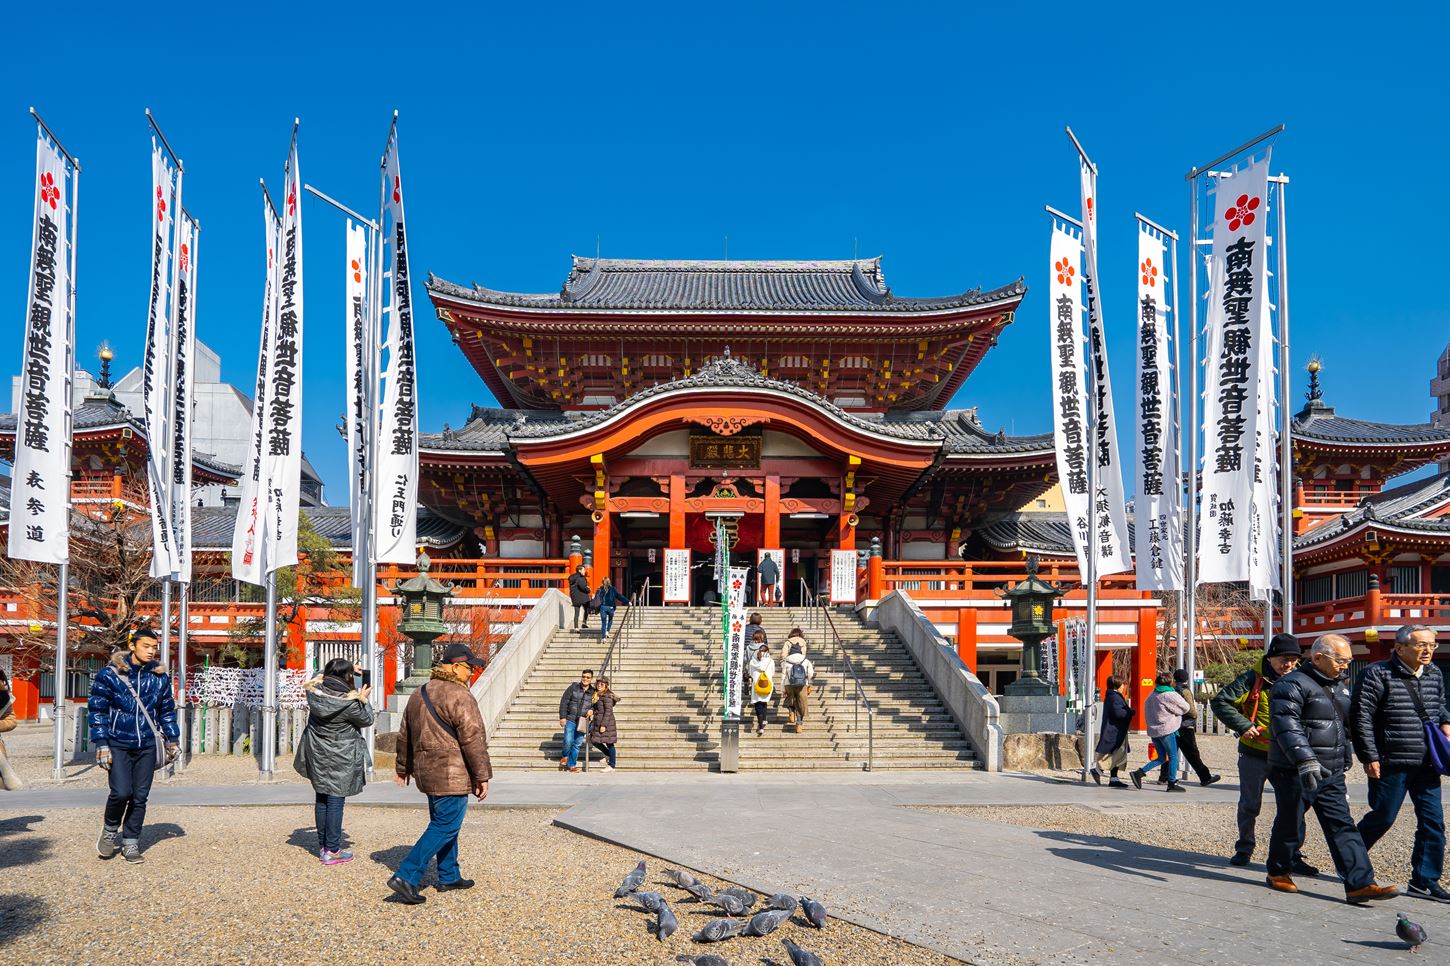 Sightseeing scenery that simply shows the weather in Nagoya in February3